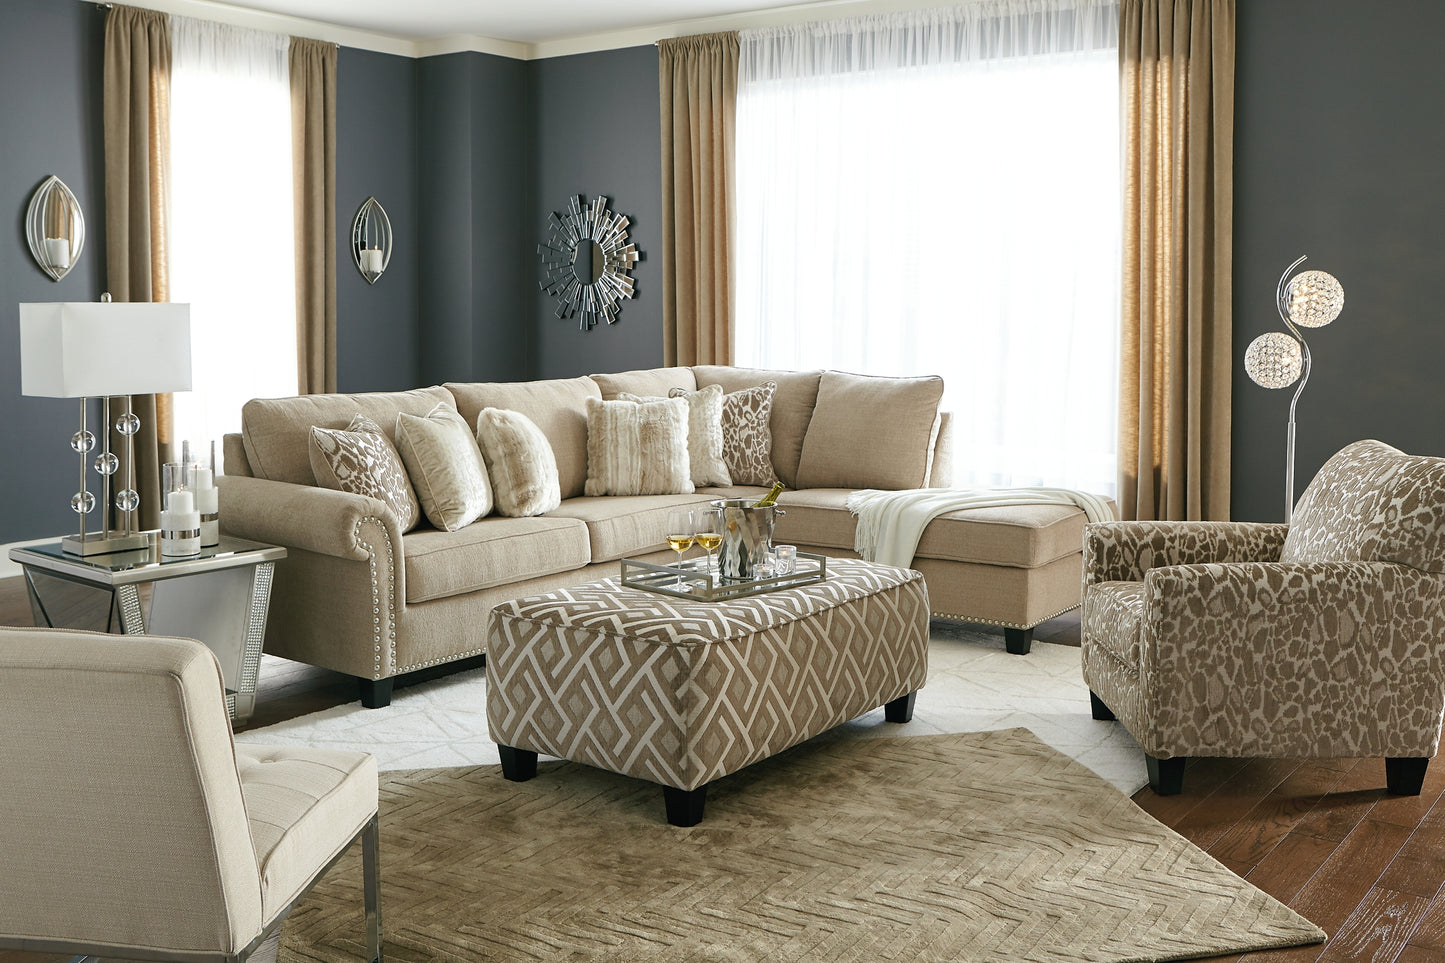 Dovemont 2-Piece Sectional with Chair and Ottoman Wilson Furniture (OH)  in Bridgeport, Ohio. Serving Bridgeport, Yorkville, Bellaire, & Avondale